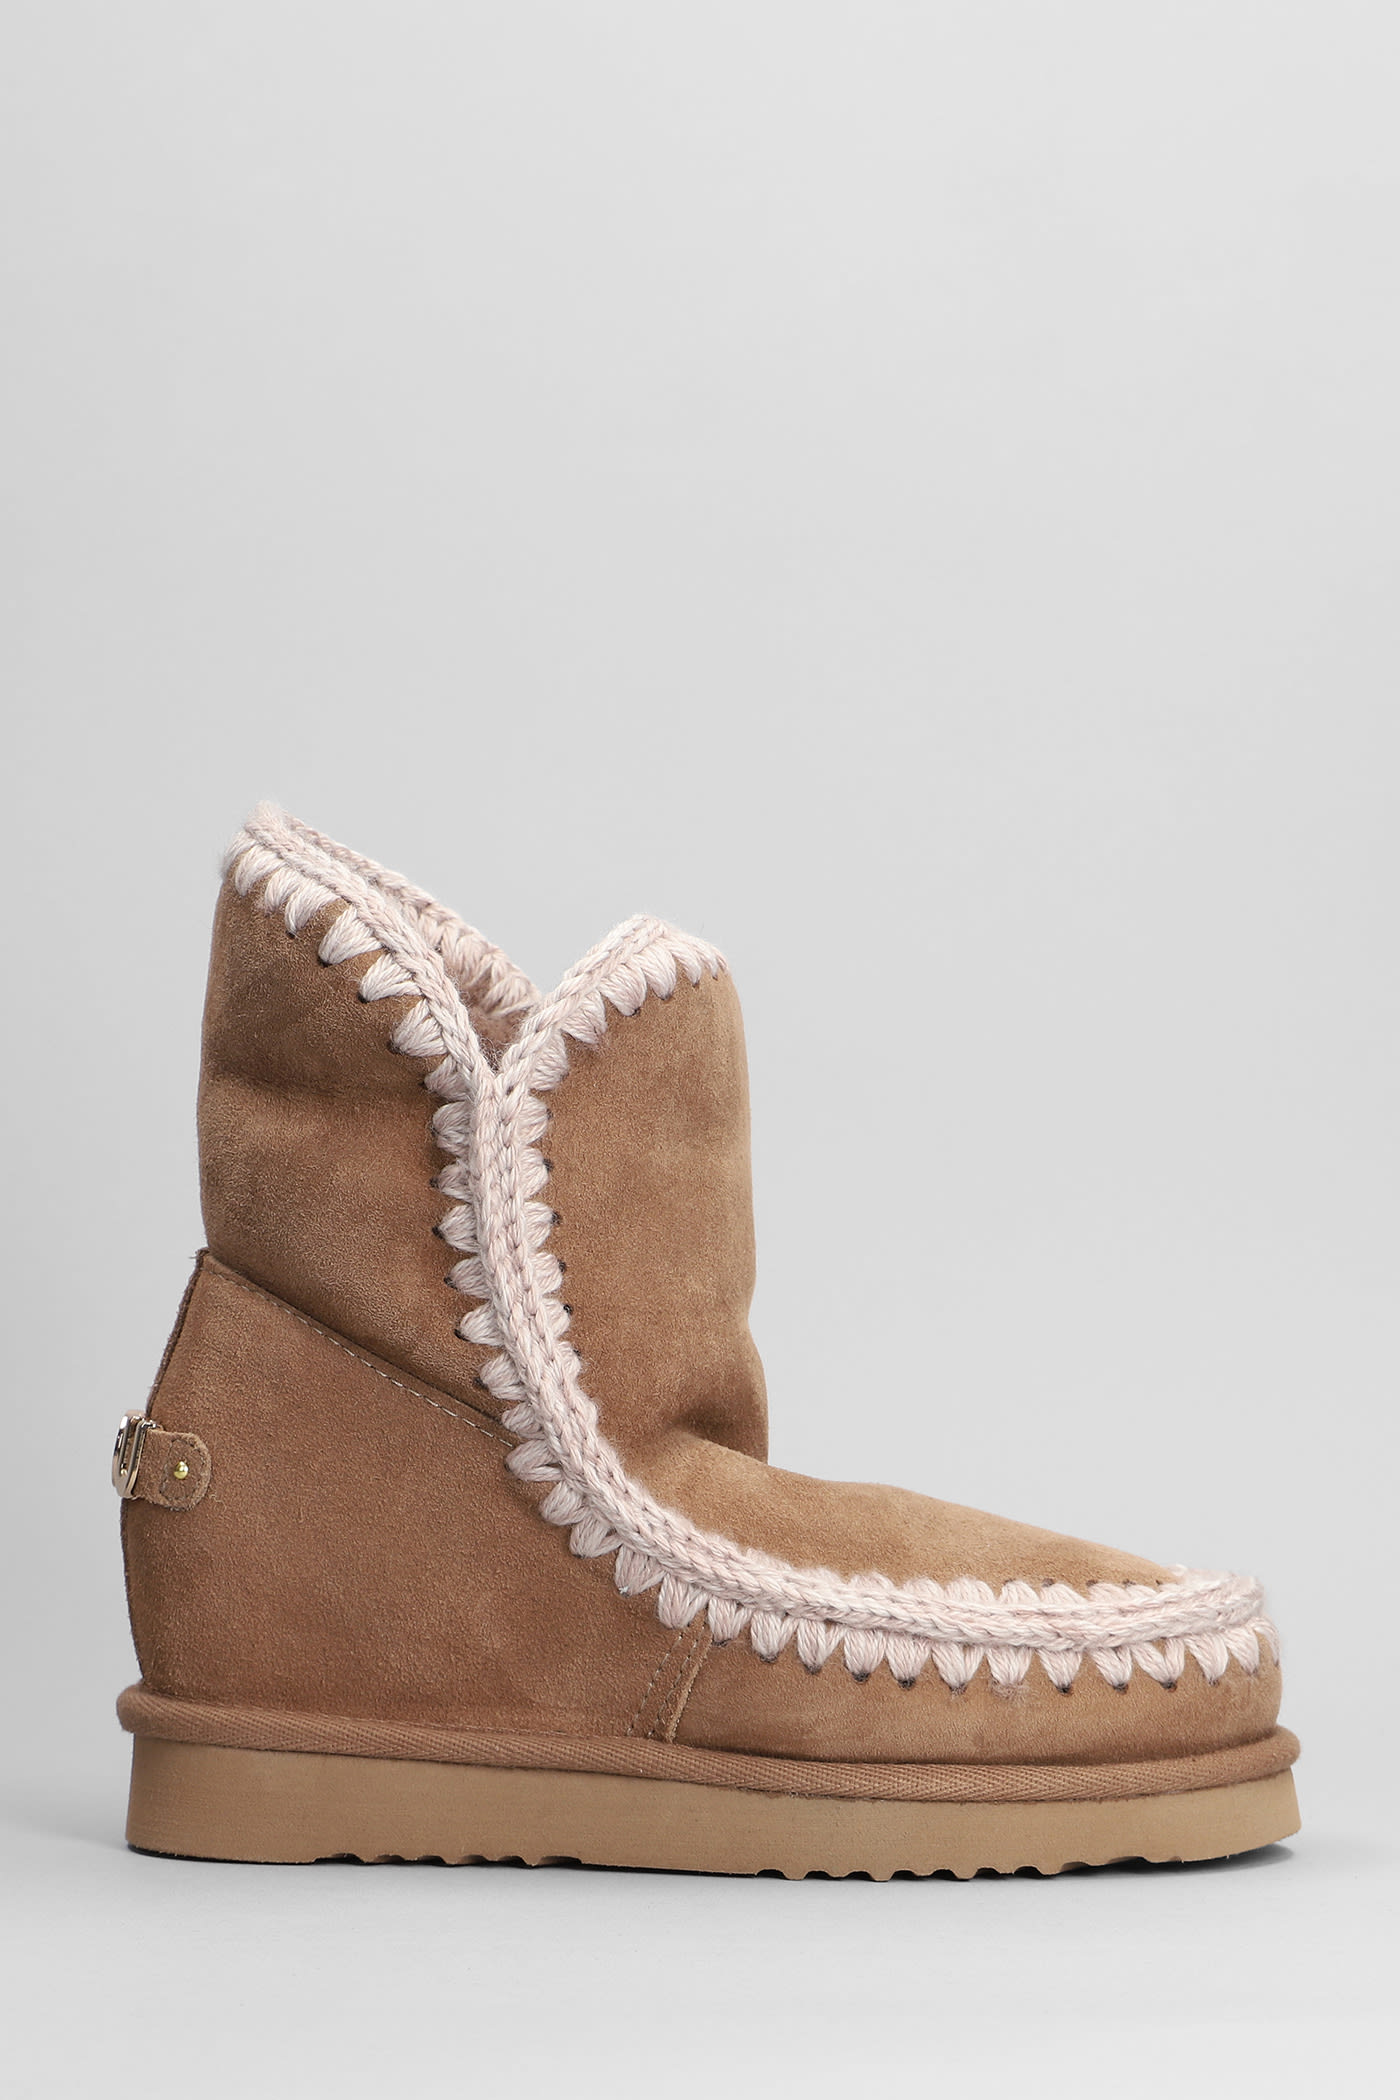 MOU INNER WEDGE ANKLE BOOTS INSIDE WEDGE IN BEIGE SUEDE